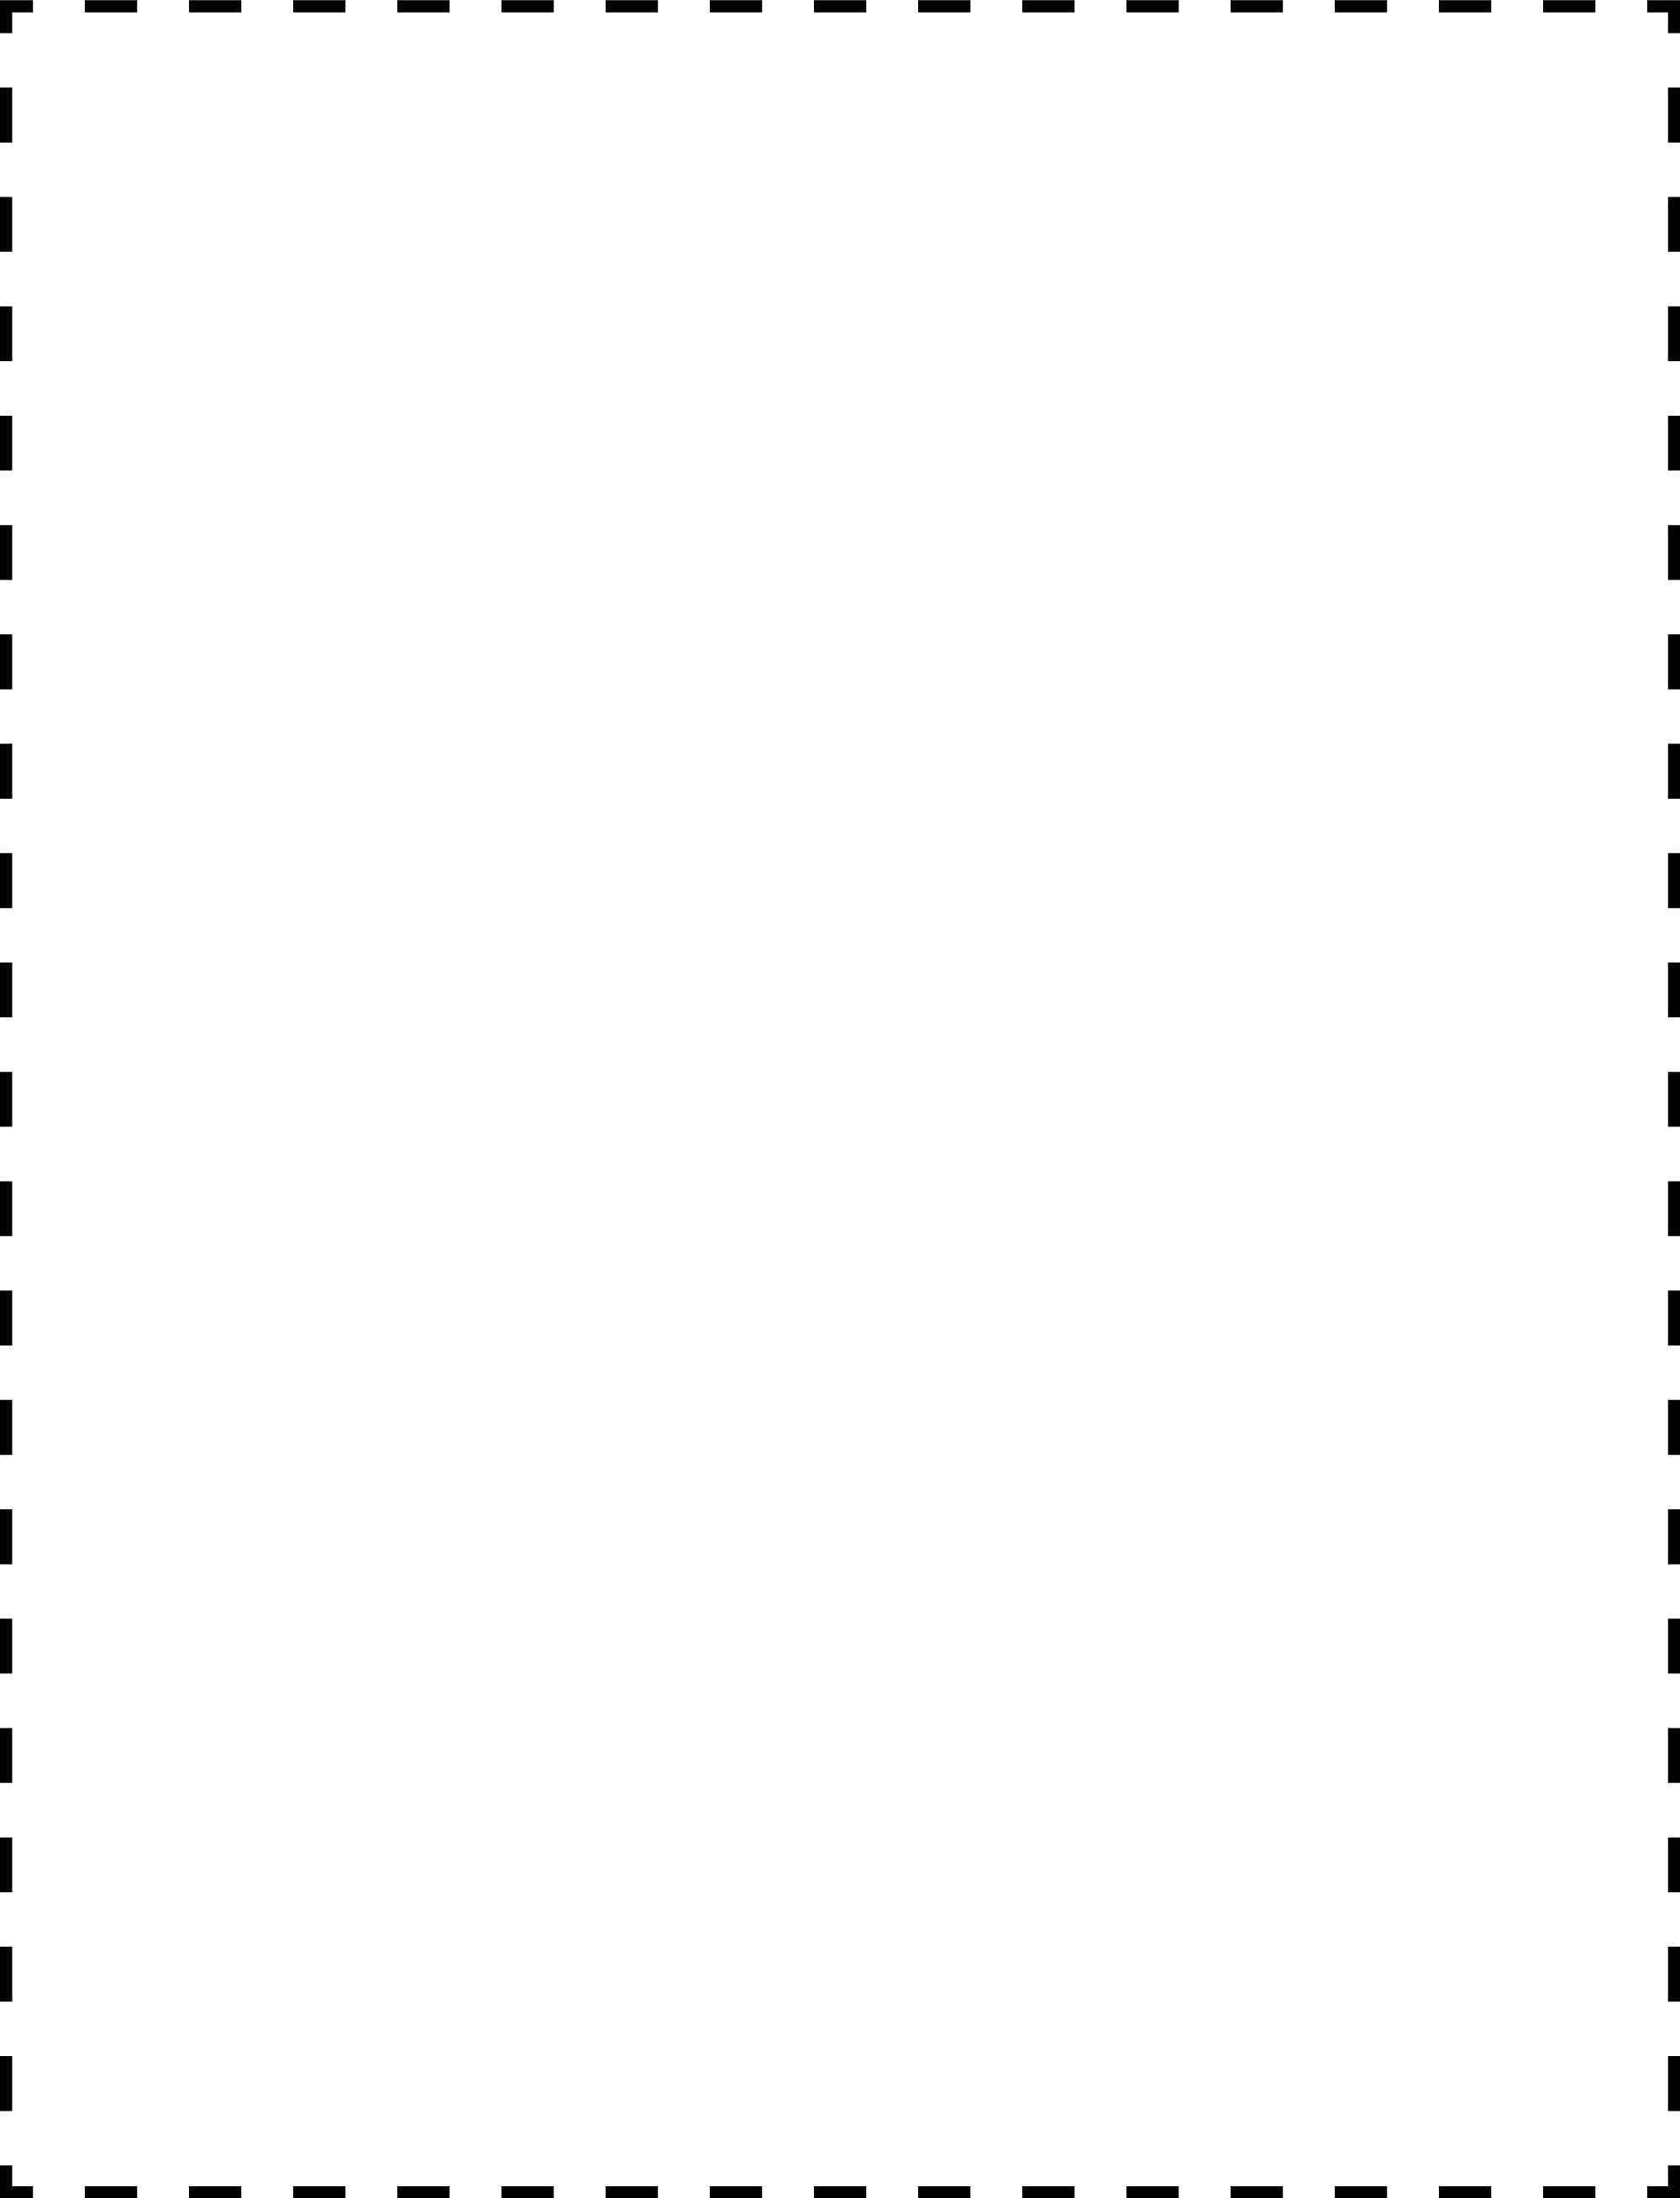 519-coupon-outline-4x5-k.png